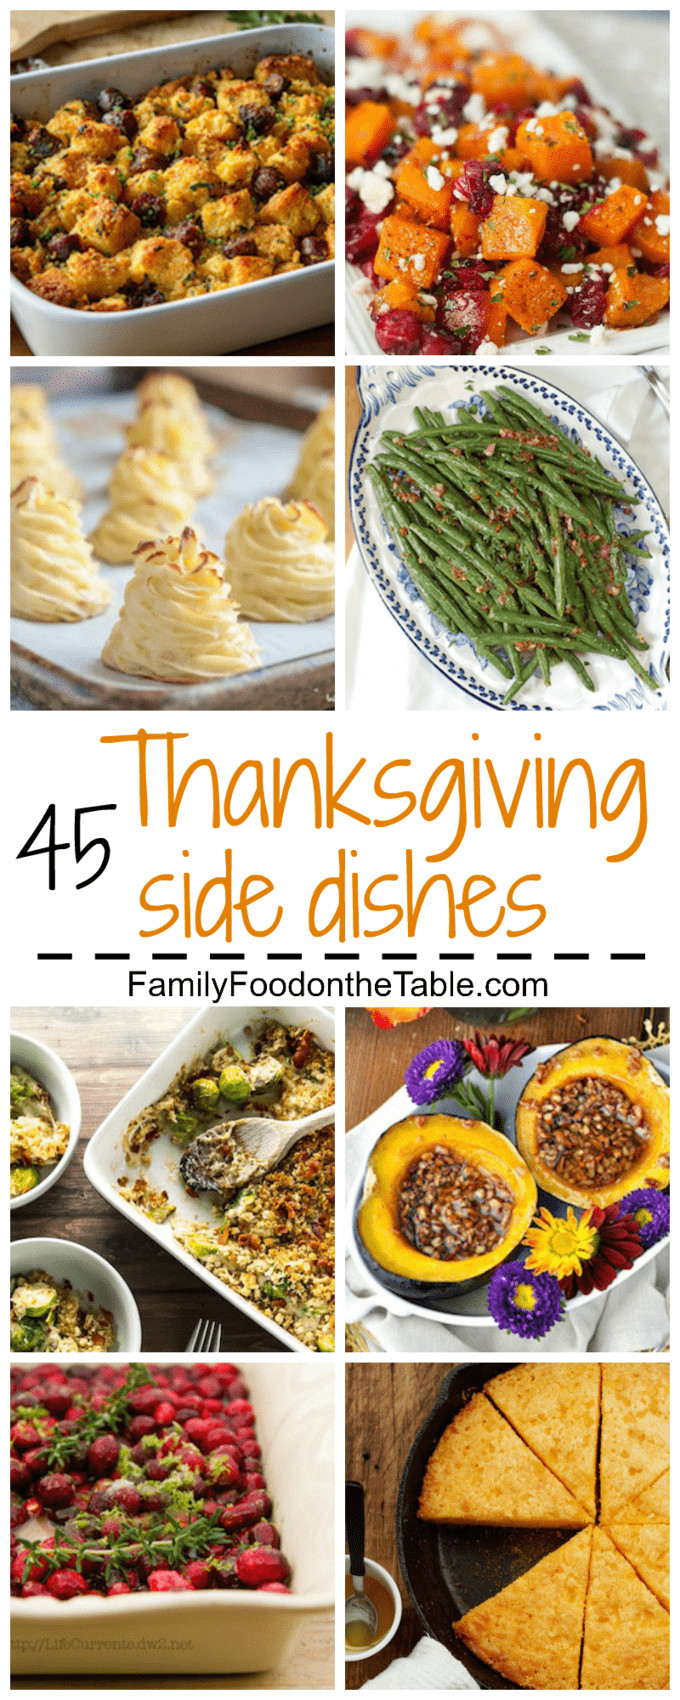 Thanksgiving Side Dishes Pinterest
 45 Thanksgiving side dishes recipe round up Family